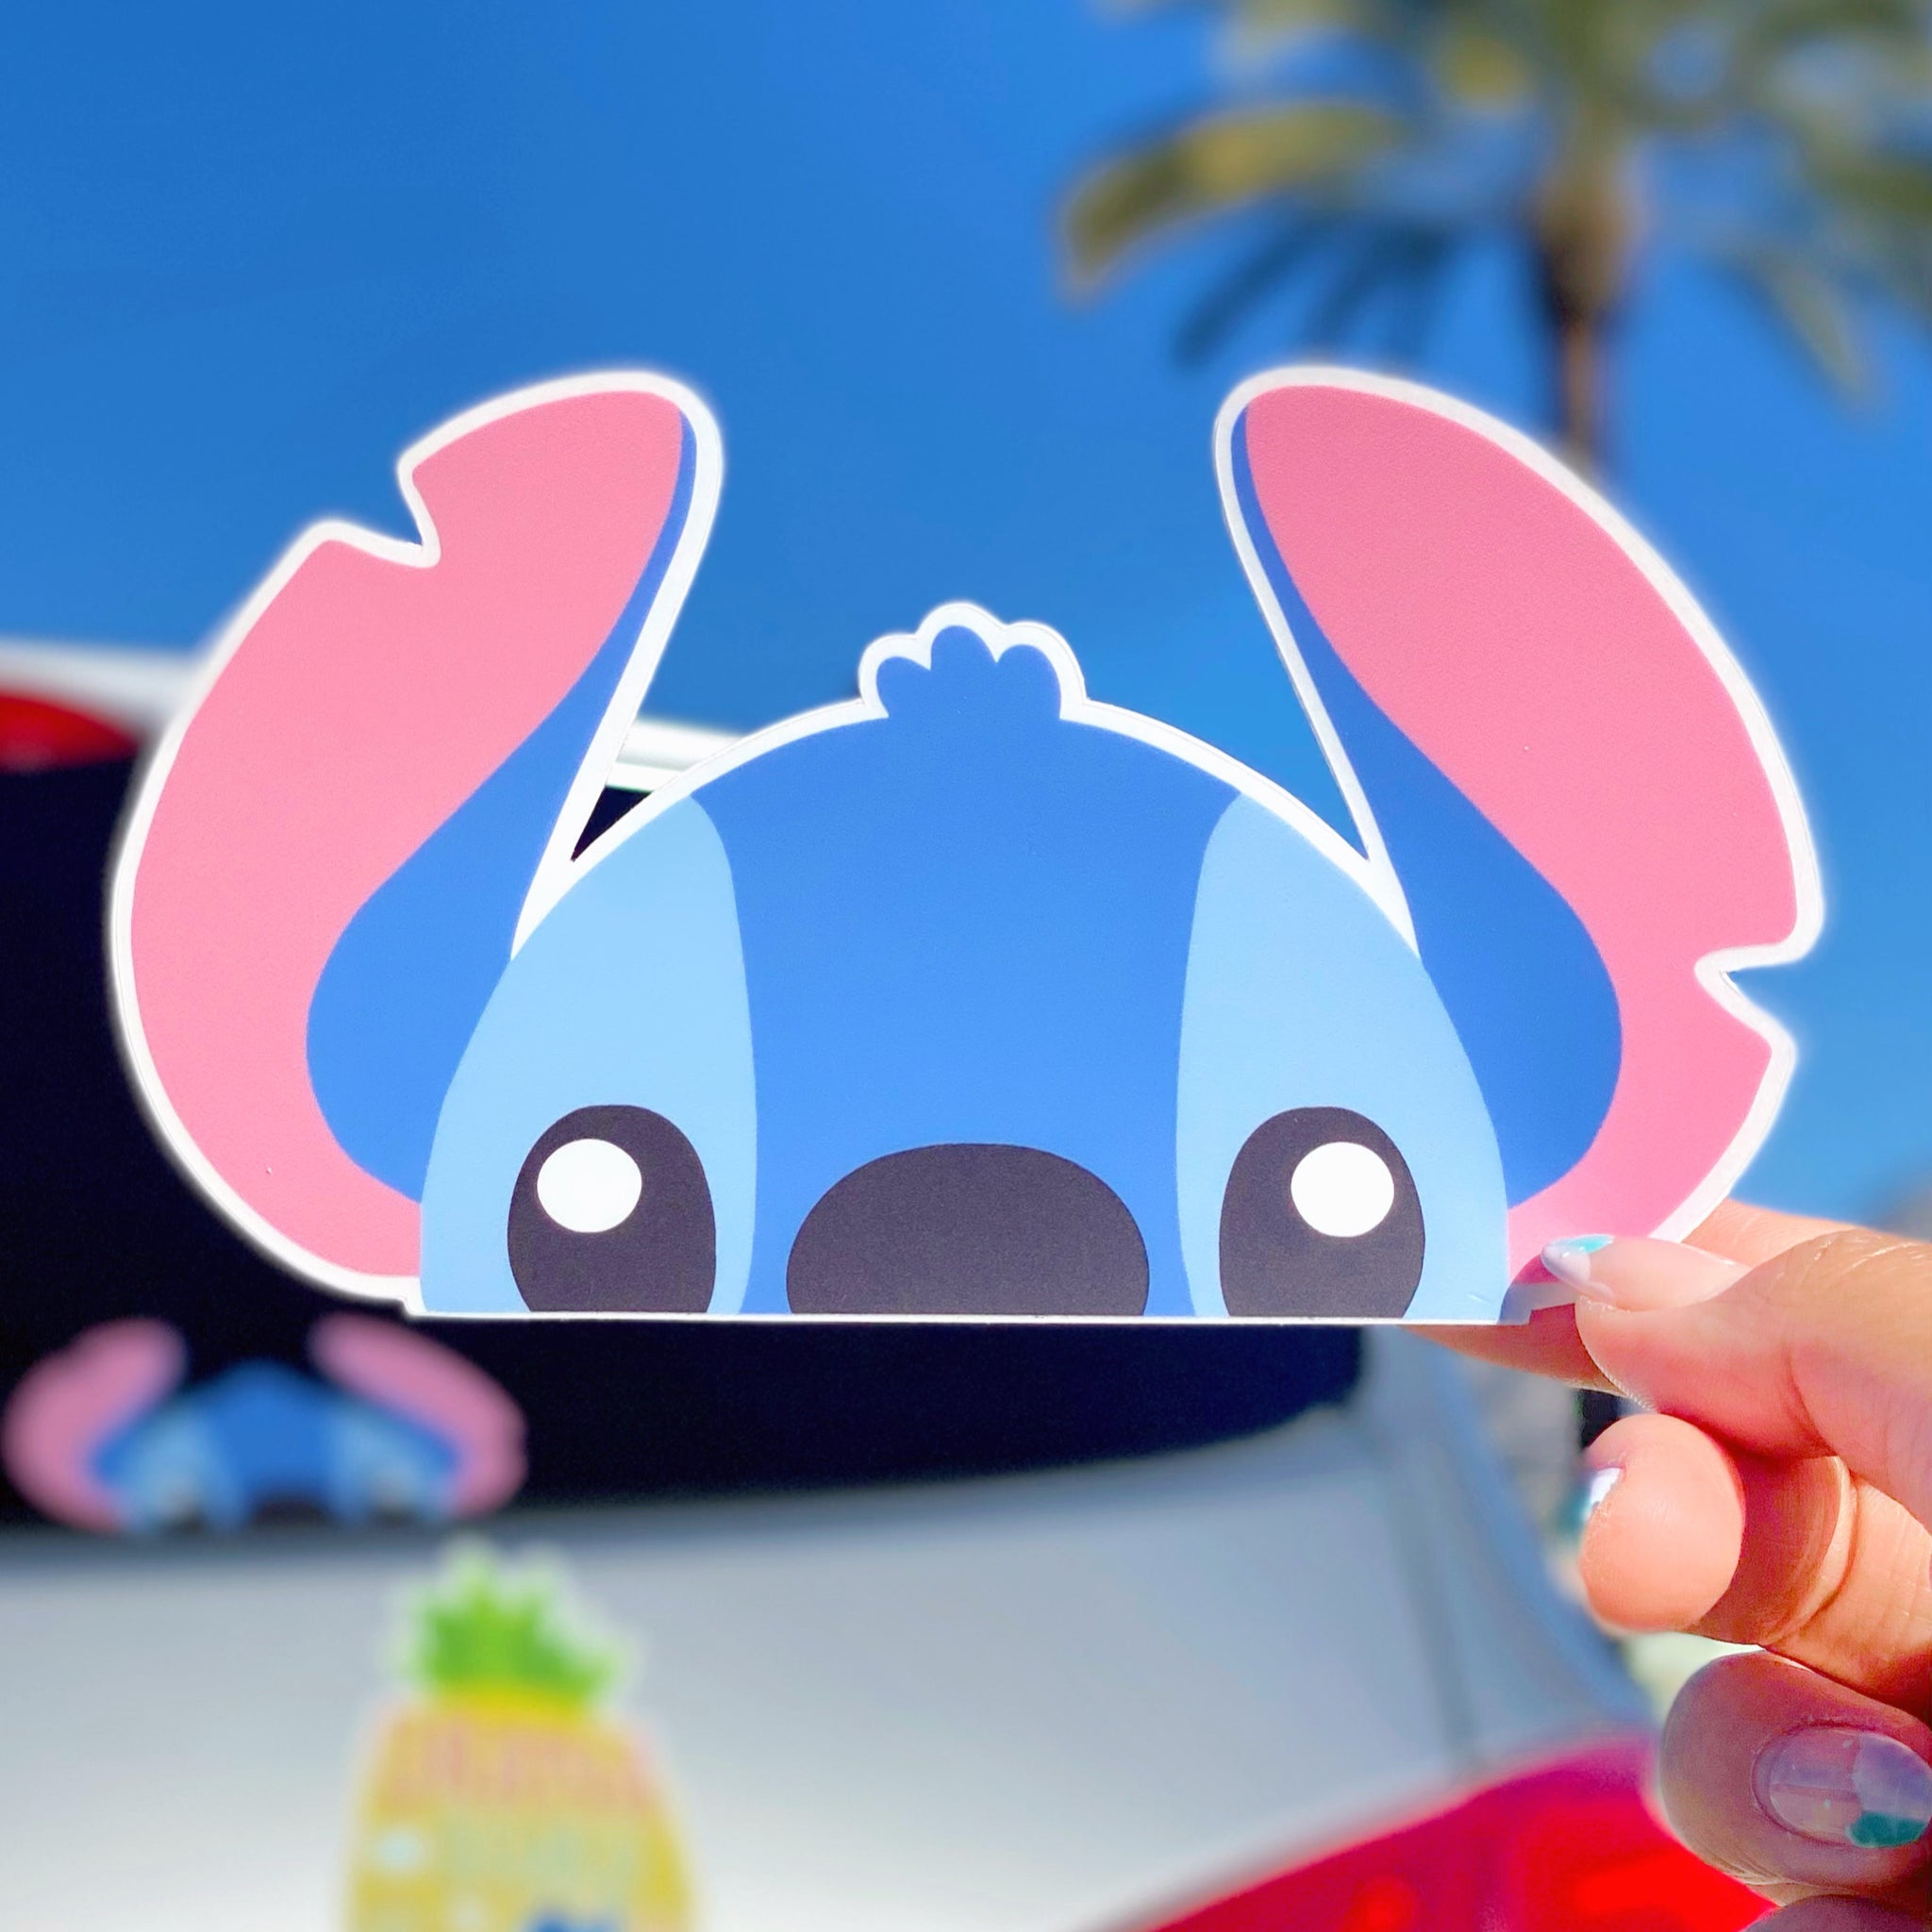 Lilo and Stitch Vynil Car Sticker Decal - Select Size